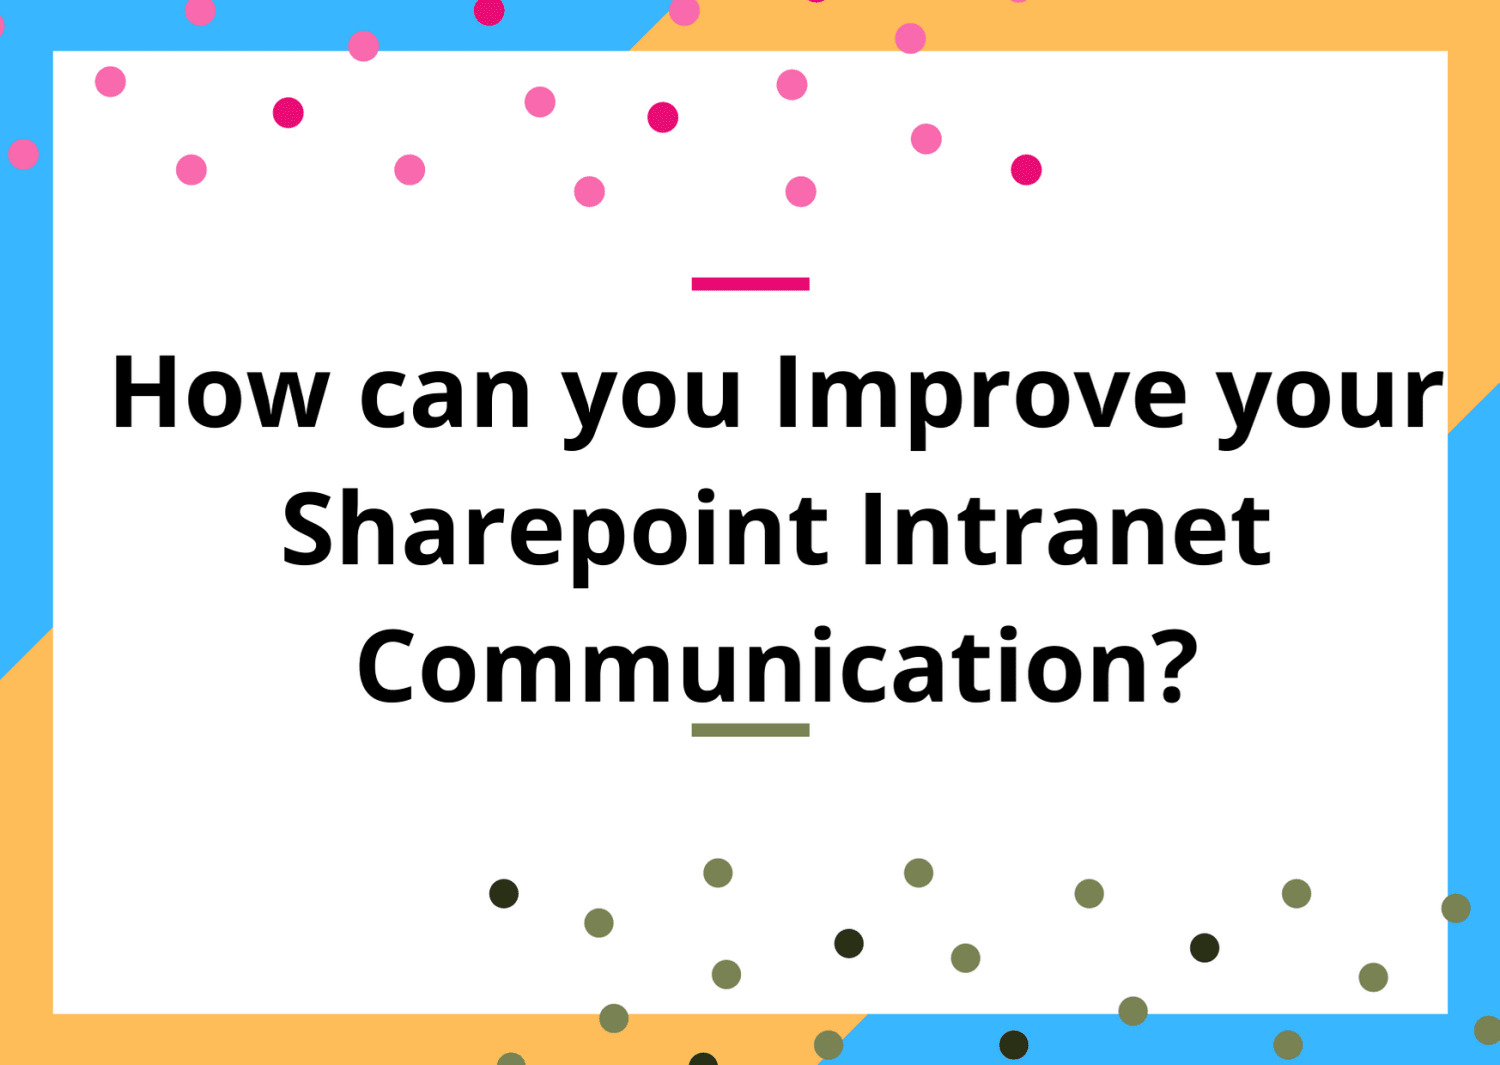 How can you Improve your Sharepoint Intranet Communication?